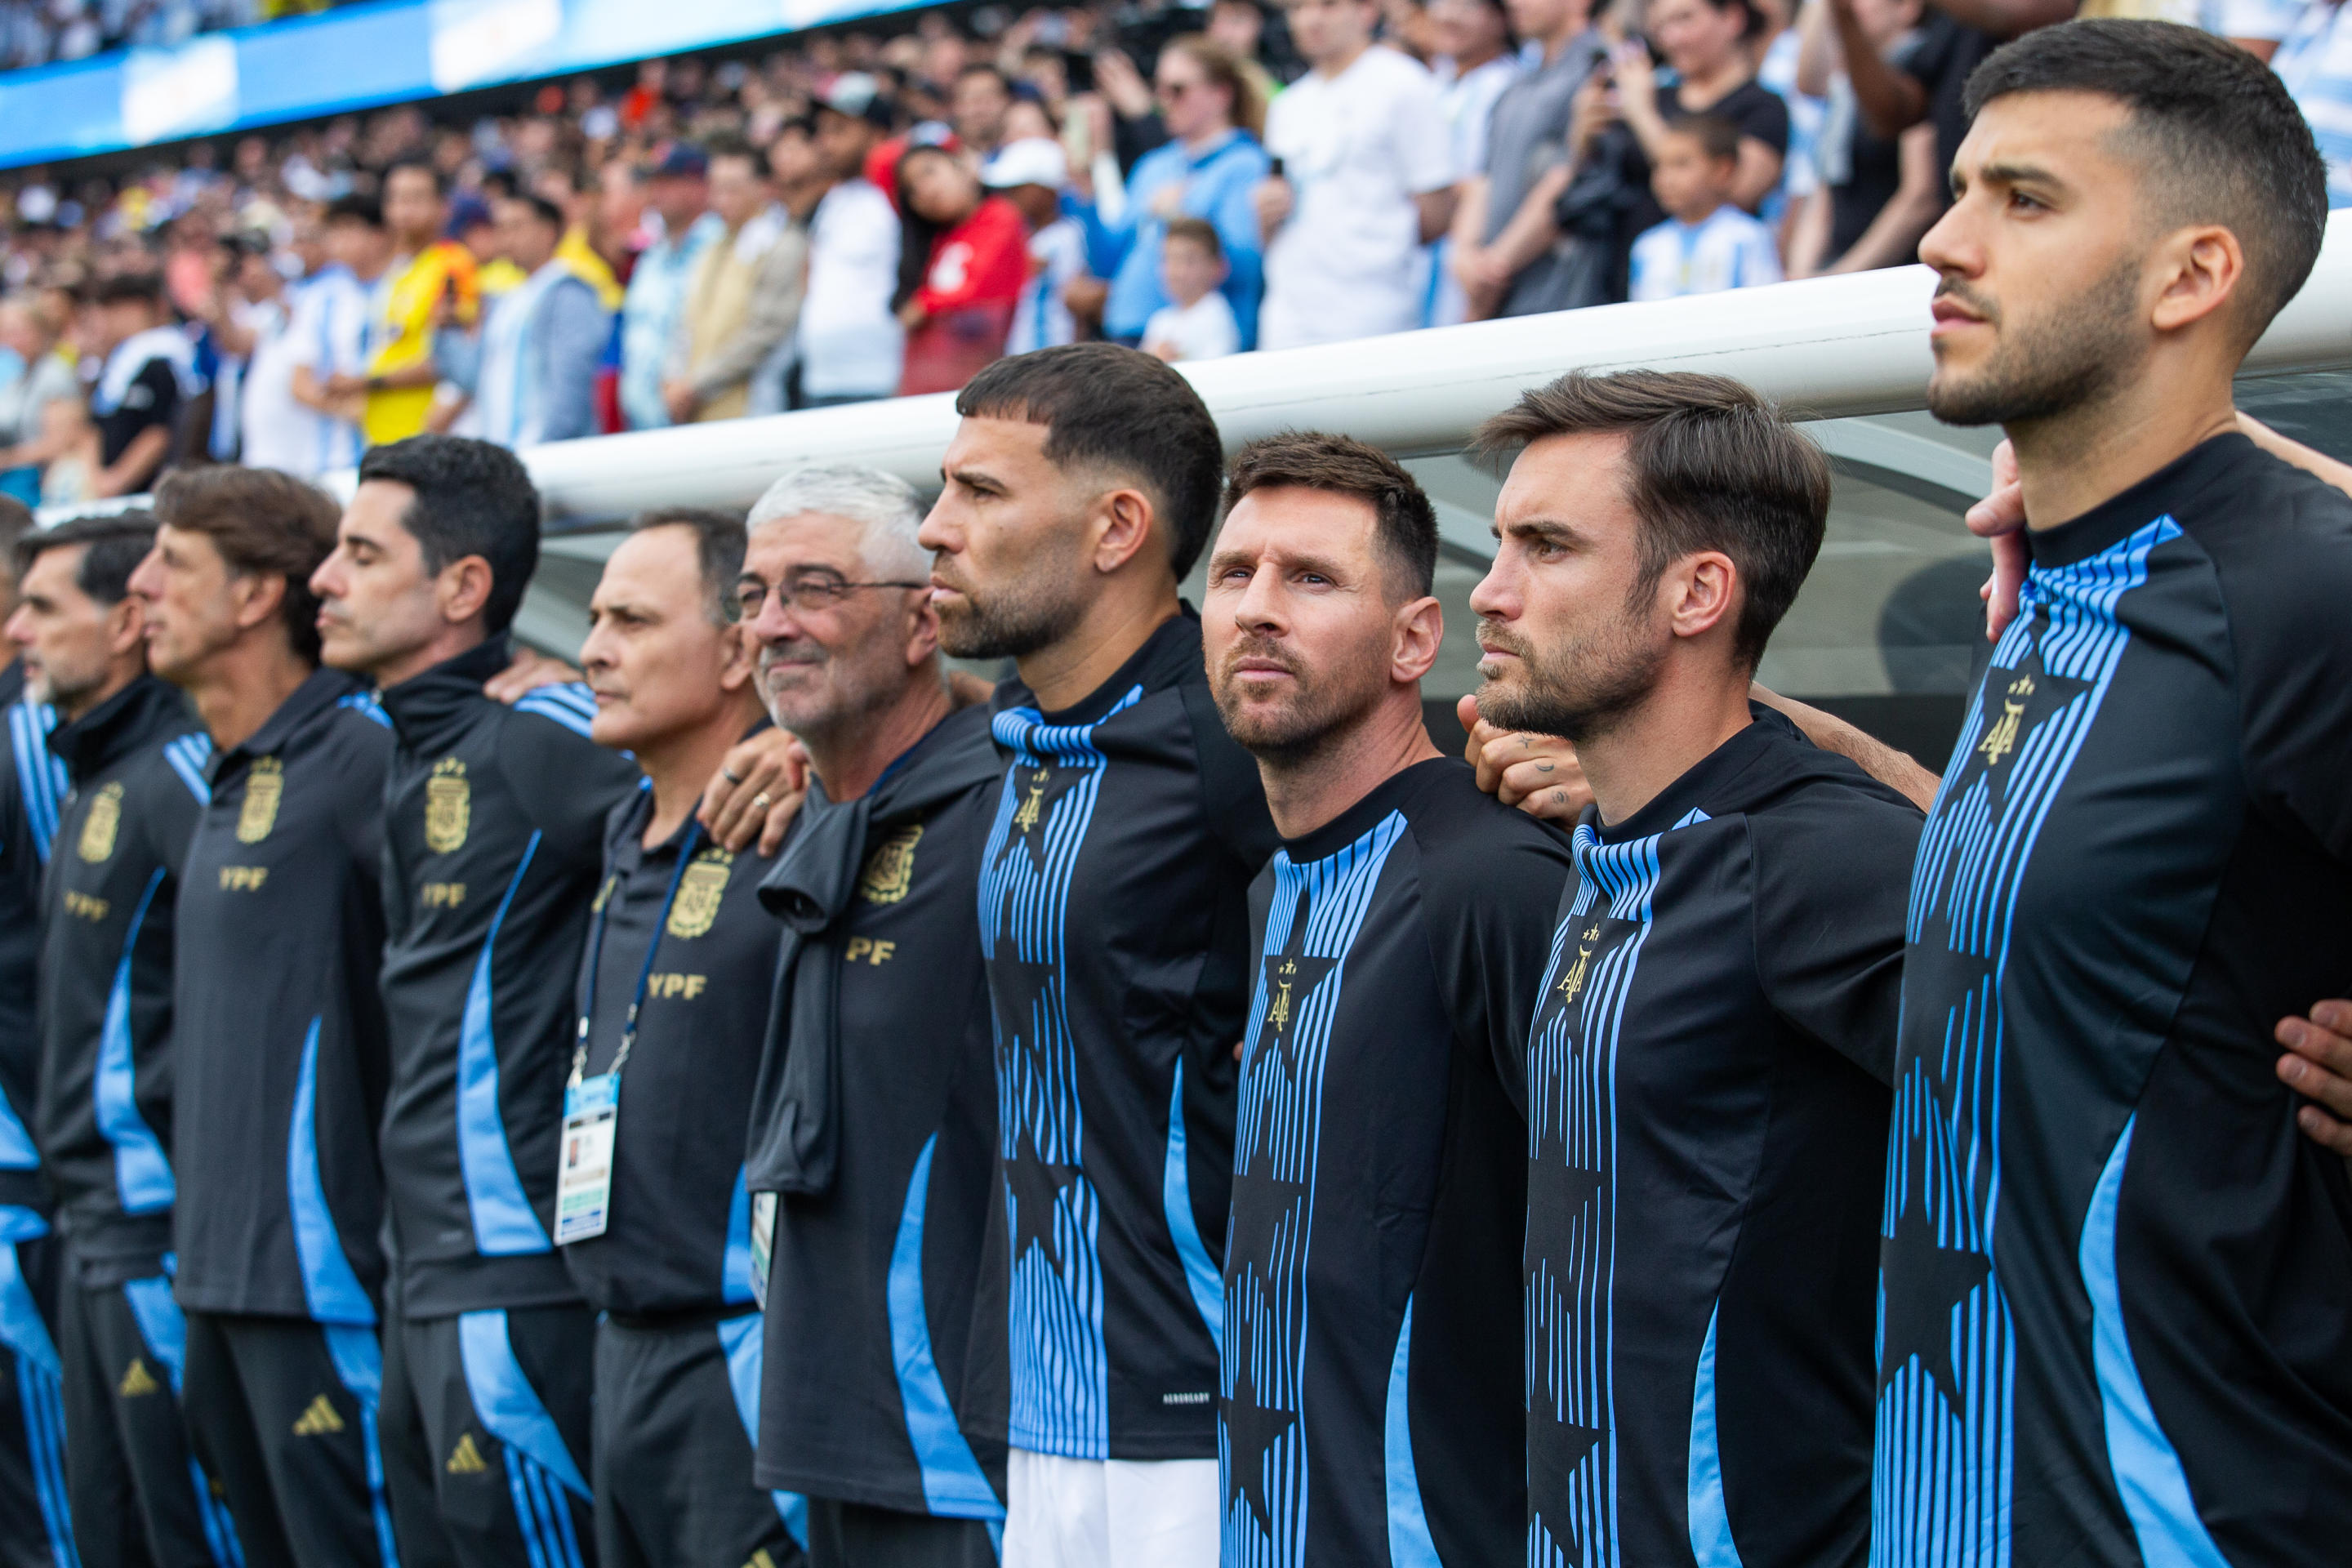 CHICAGO, IL - JUNE 9: Lionel Messi #10 of Argentina looks on from the substitute bench before the national anthem before a game between Ecuador and Argentina at Soldier Field on June 9, 2024 in Chicago, Illinois. (Photo by Michael Miller/ISI Photos/Getty Images)